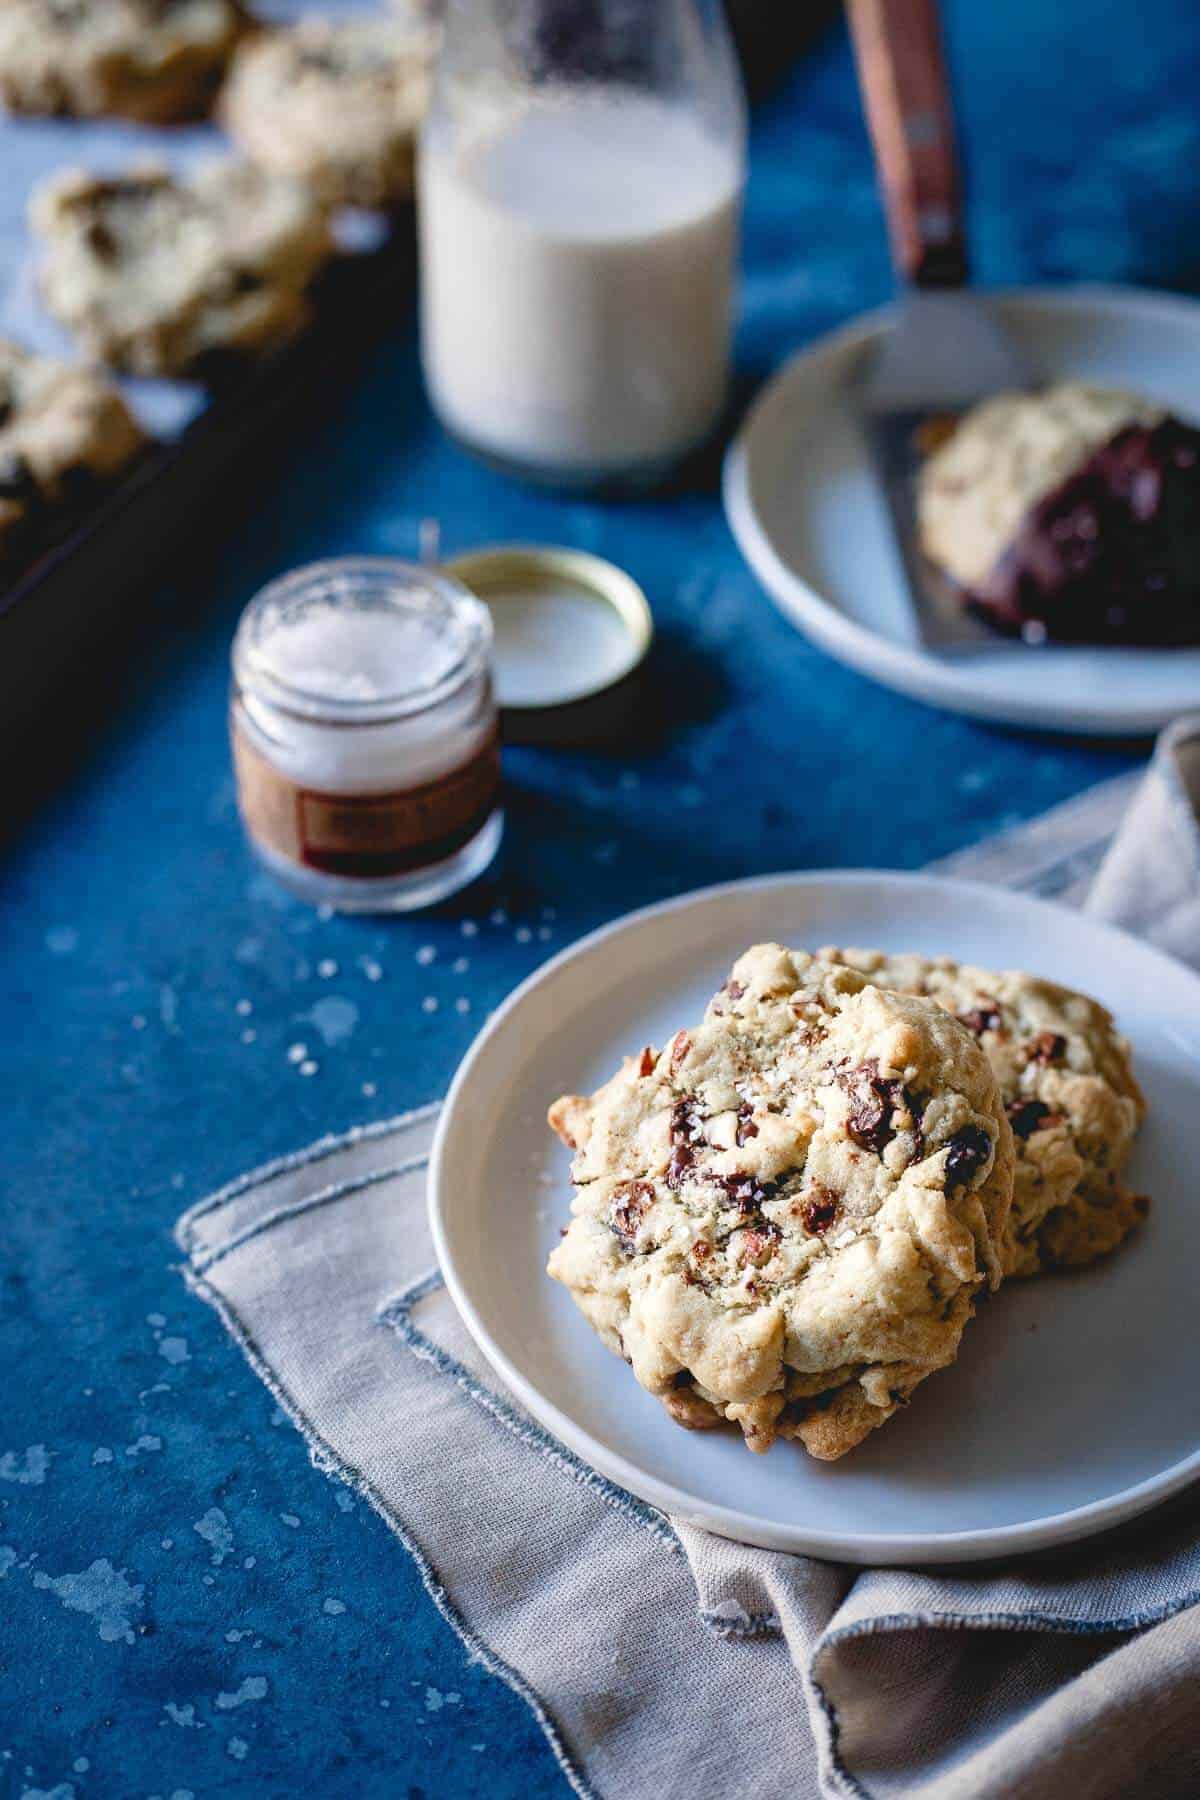 These cranberry almond chocolate chip cookies are infused with orange zest. Dip them in chocolate and sprinkle with sea salt for a gluten-free holiday treat!